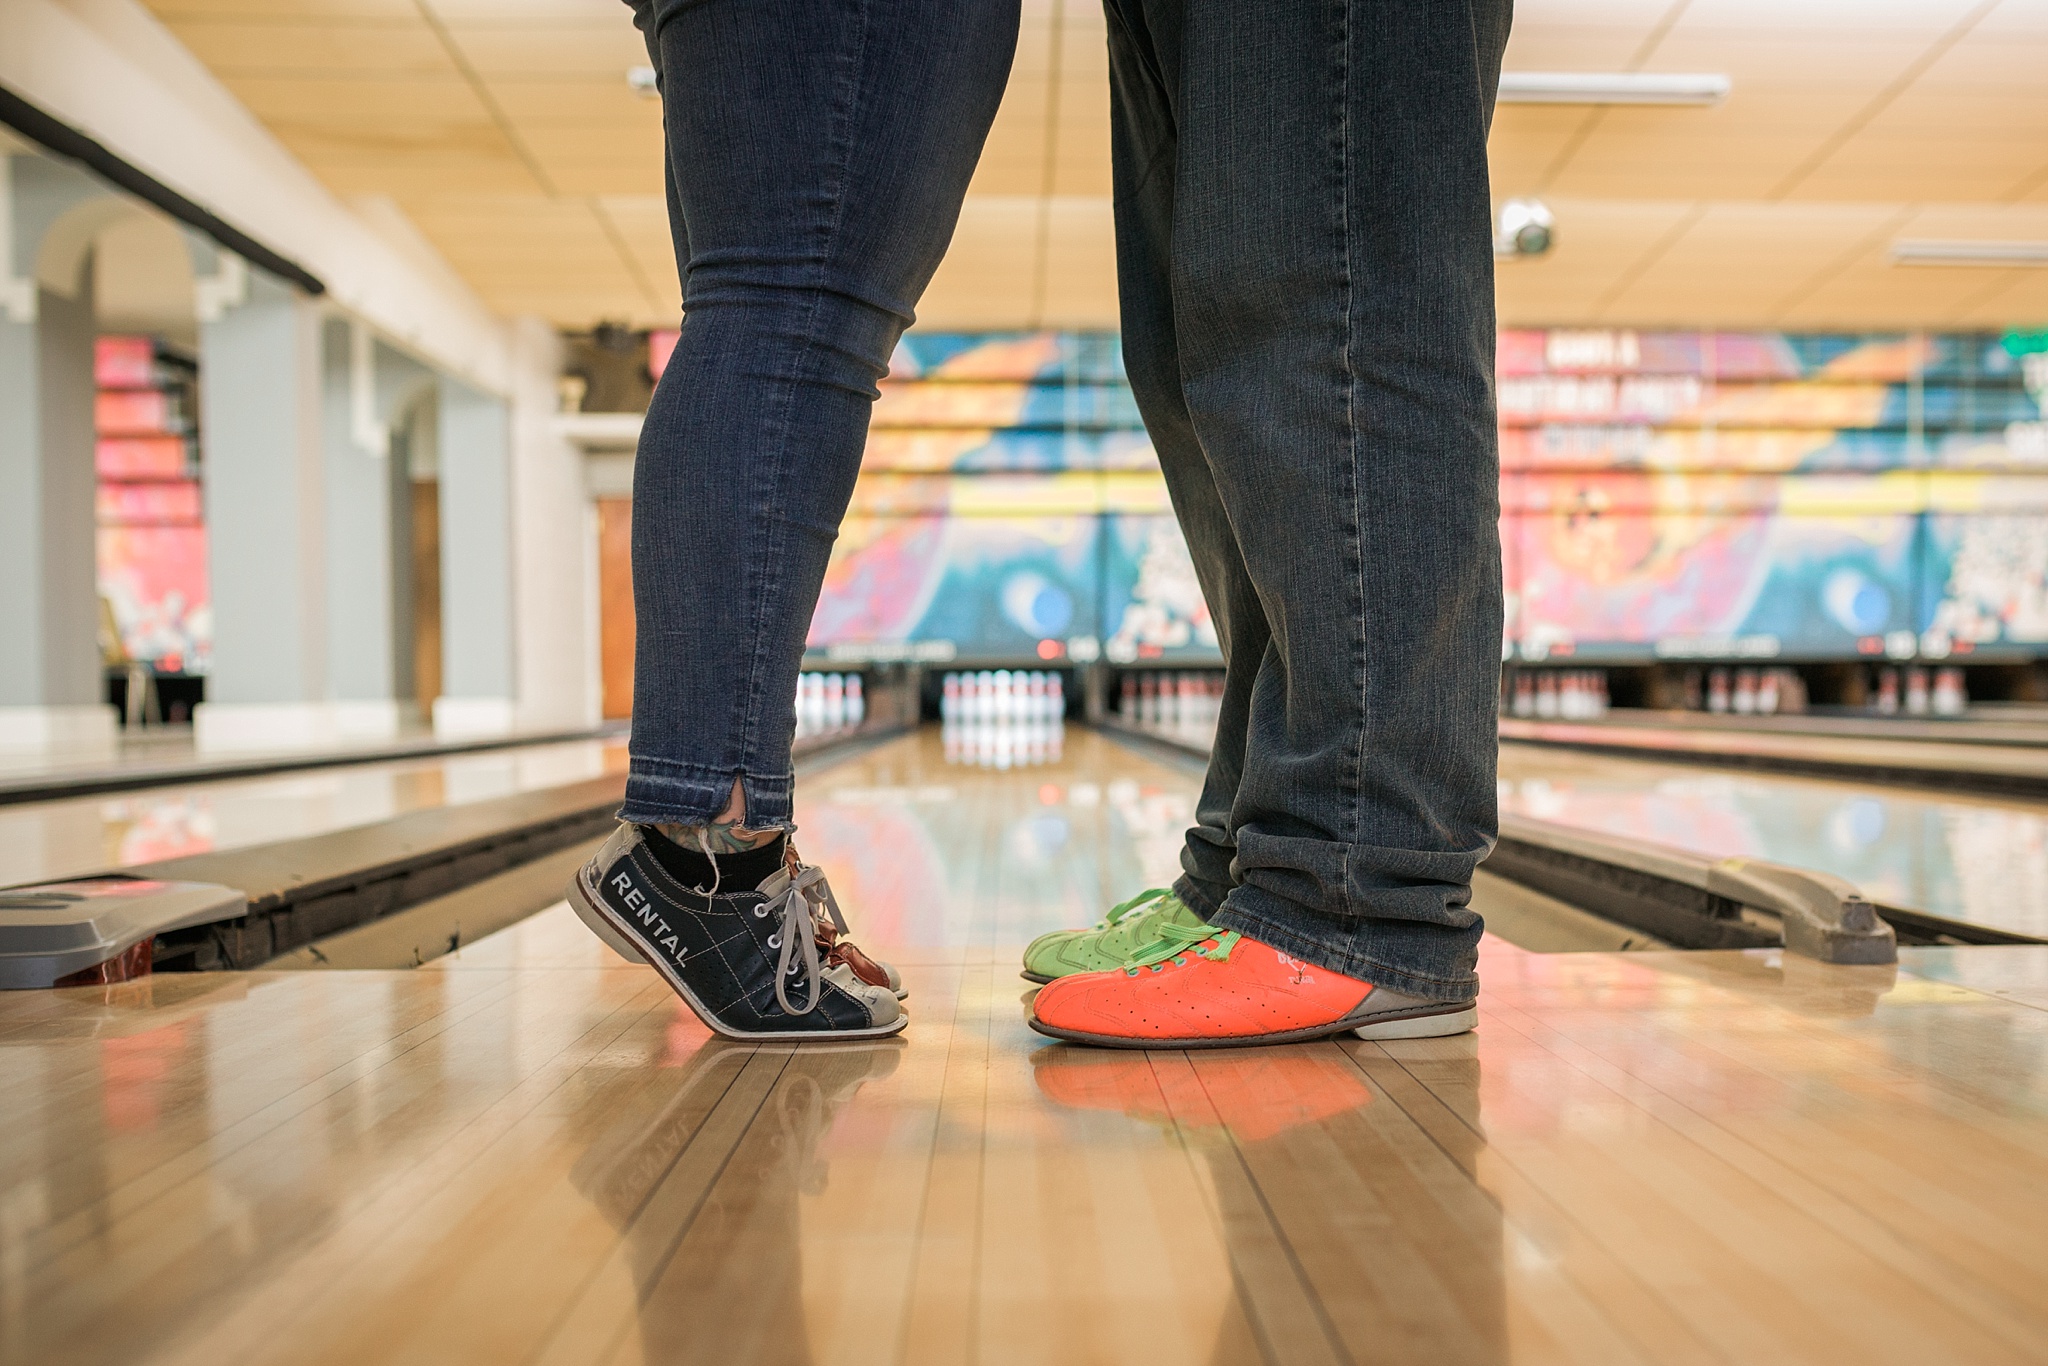 Couple standing in the bowling lane during their bowling alley engagement session. Briana & Kevin’s Devil’s Backbone and Sweetheart Lanes Engagement Session by Colorado Engagement Photographer, Jennifer Garza. Devil's Backbone Engagement, Devil's Backbone Engagement Session, Loveland Engagement Session, Colorado Engagement Photography, Colorado Engagement Photos, Sweetheart Lanes Bowling Alley, Bowling Alley Engagement, Bowling Engagement Session, Bowling Engagement Photography, Wedding Inspo, Colorado Wedding, Colorado Bride, Brides of Colorado, Bride to Be, Couples Goals